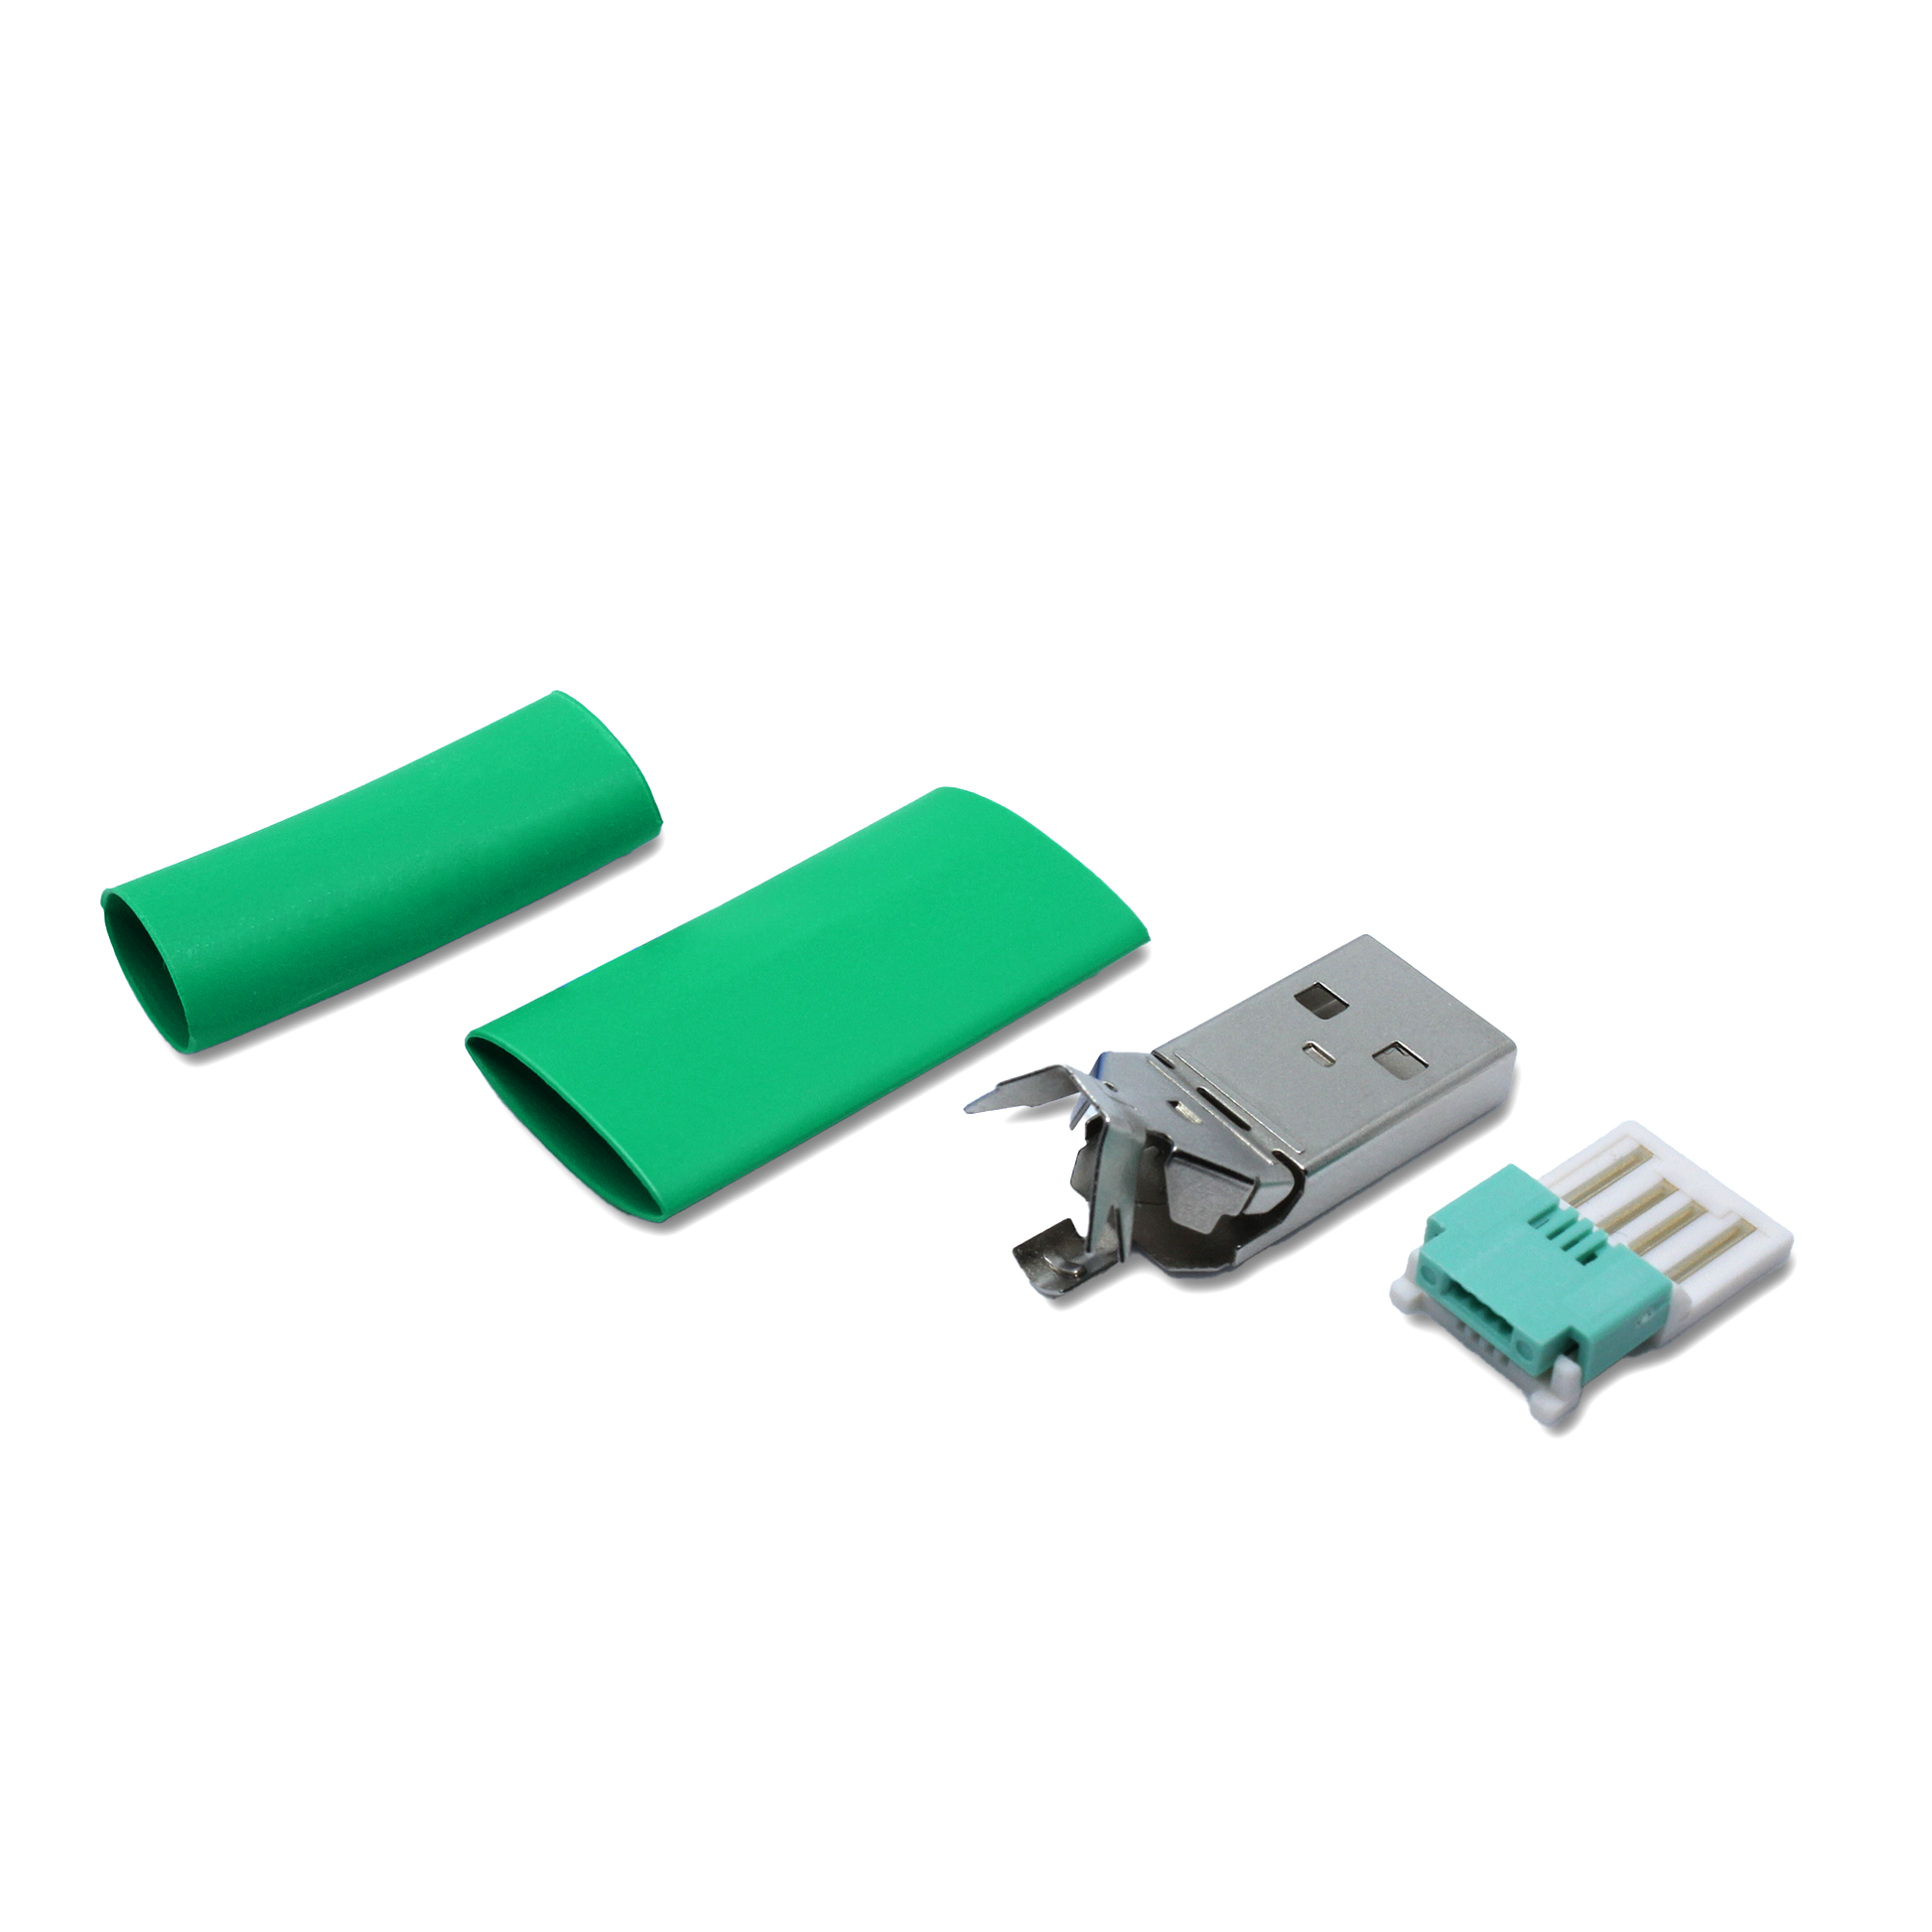 USB A plug green in single parts, with additional small heat shrink tube for repair (solderless/crimp) of thin USB 2.0 cables